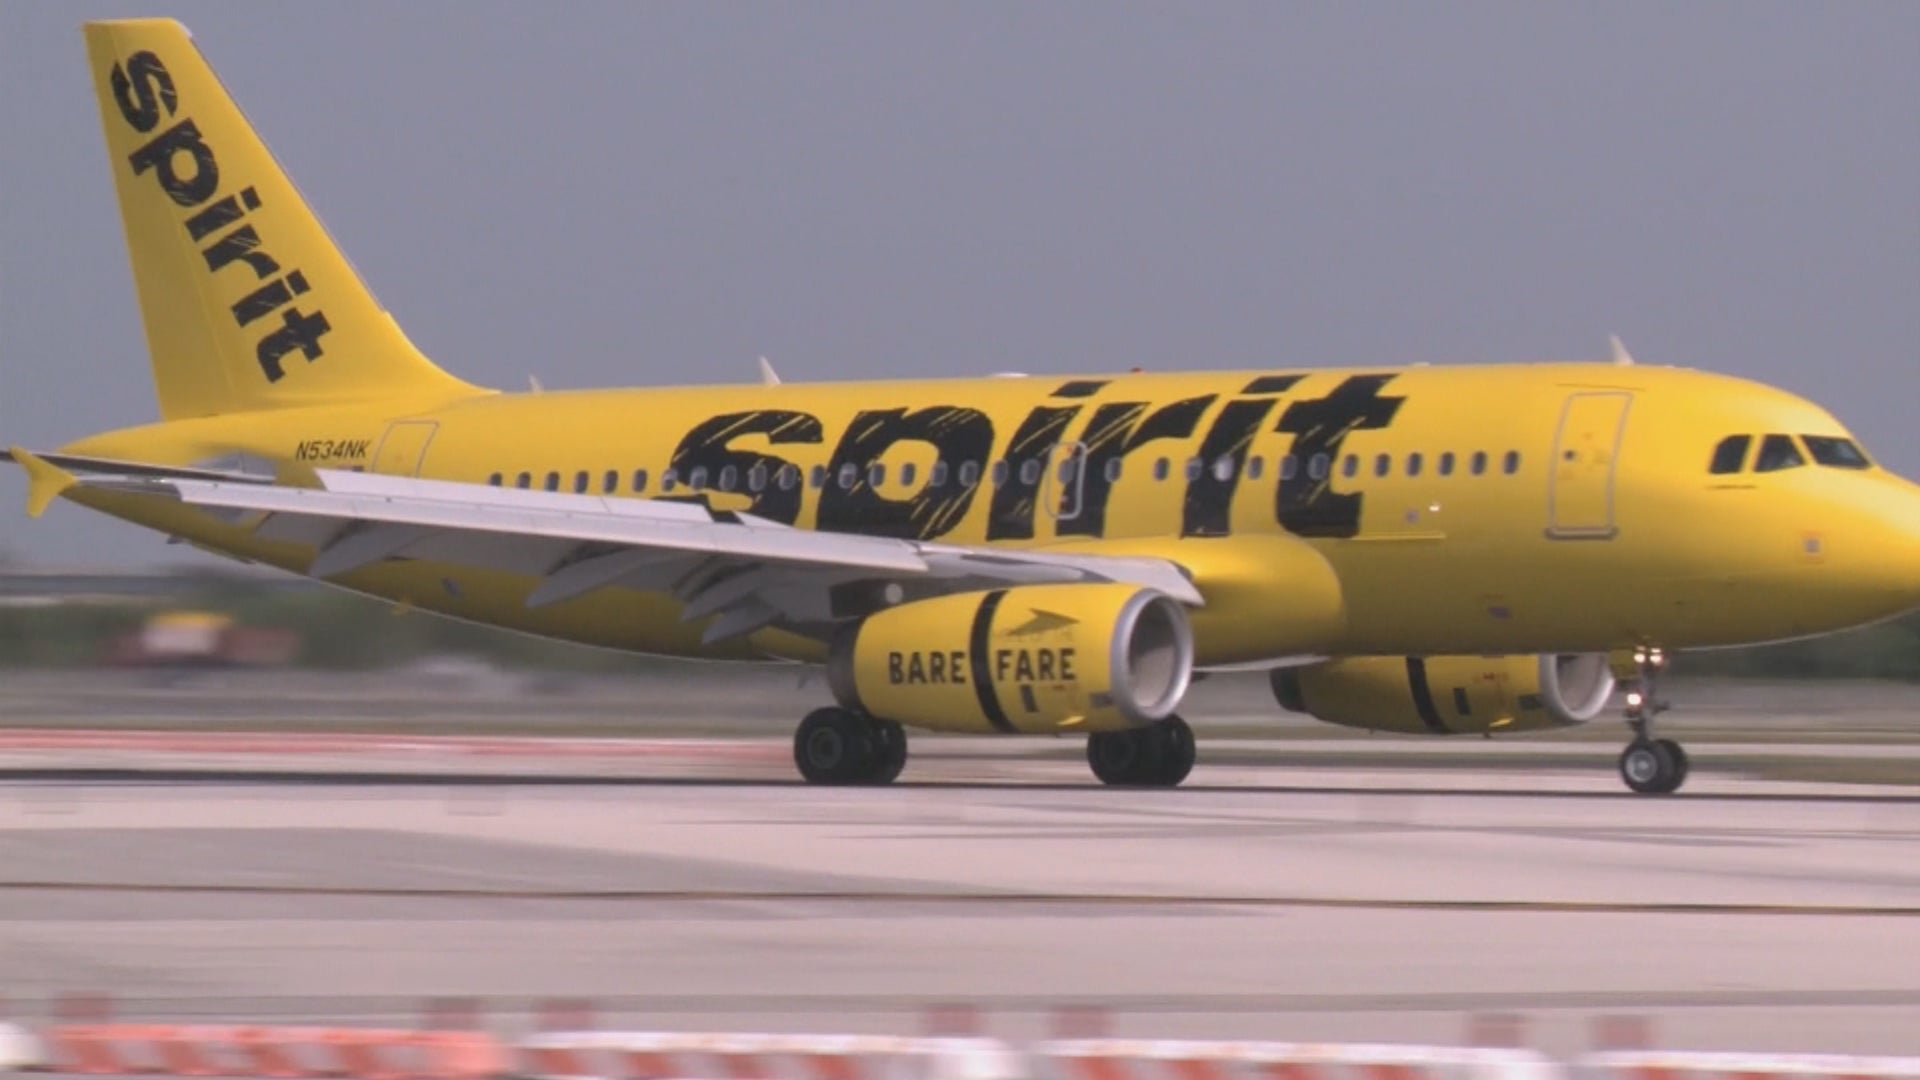 Nearly 60% of Spirit Airlines flights experience delays after technical issues